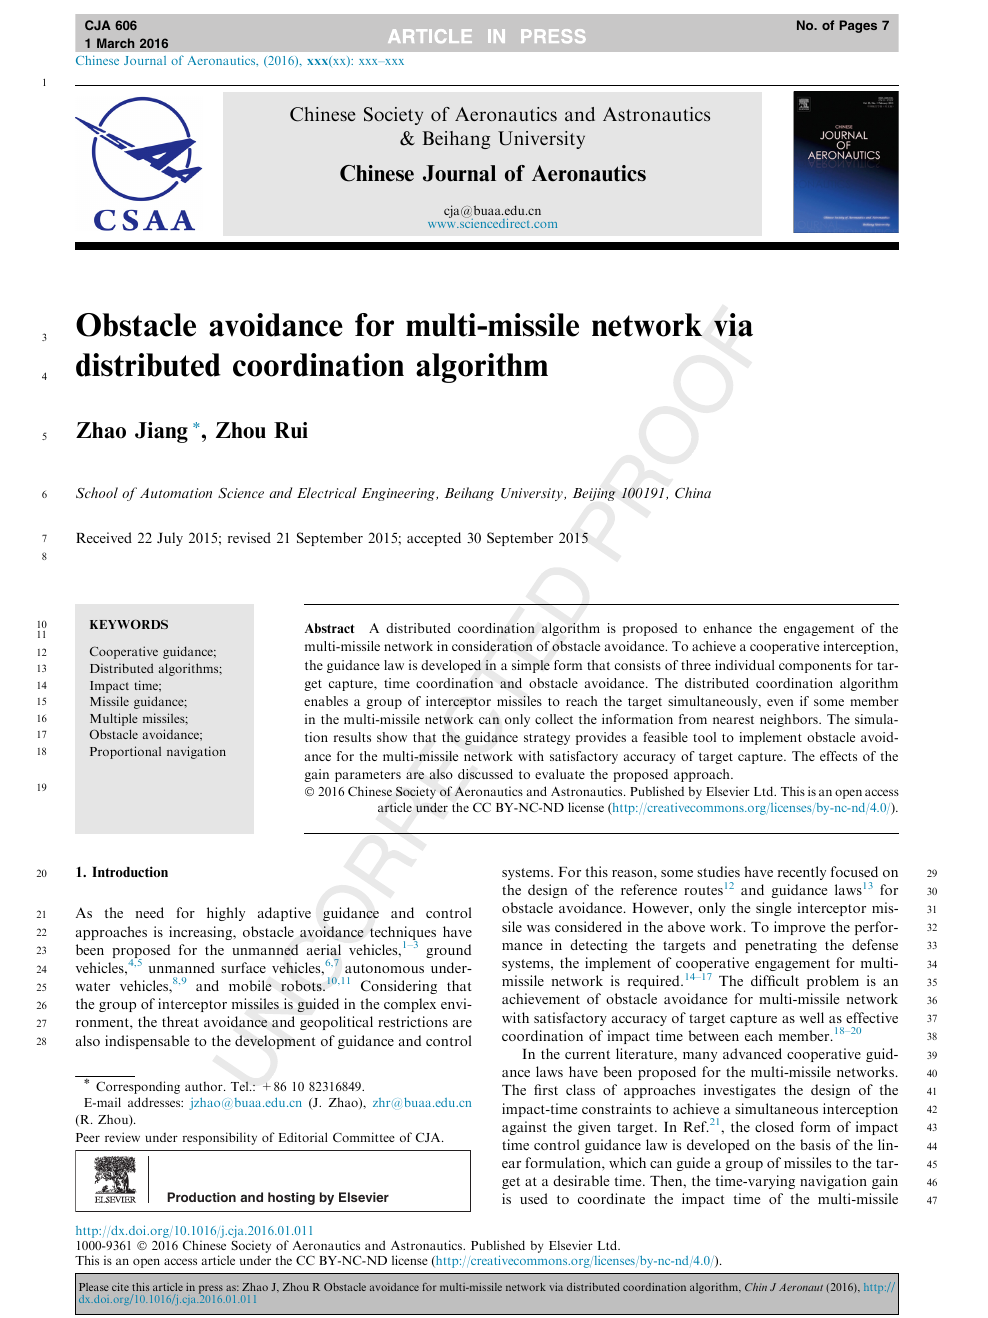 Obstacle avoidance for multi-missile network via distributed coordination  algorithm – topic of research paper in Materials engineering. Download  scholarly article PDF and read for free on CyberLeninka open science hub.